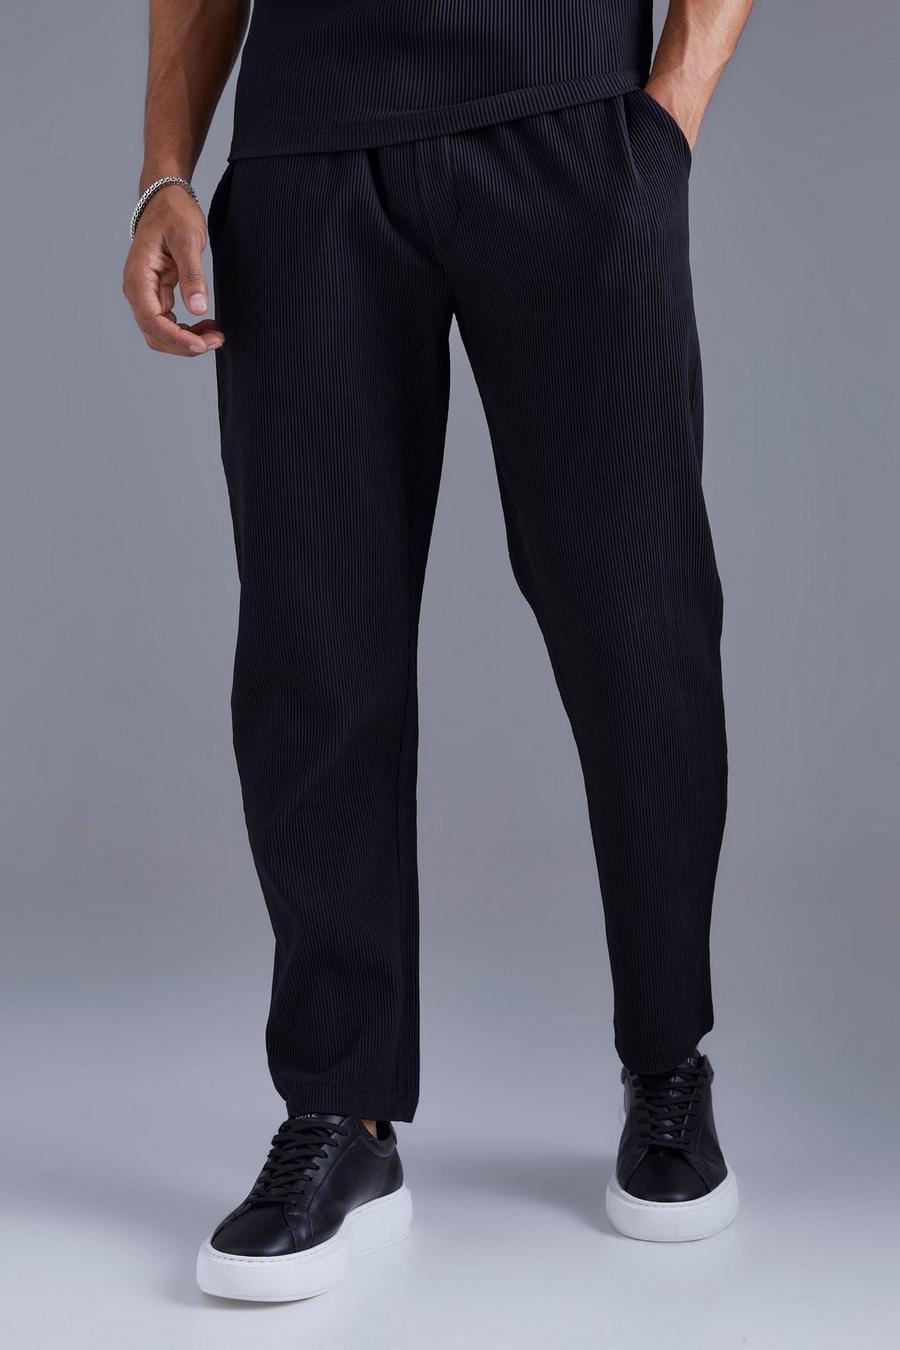 Black Elasticated Waist Tapered Fit Pleated Trouser image number 1